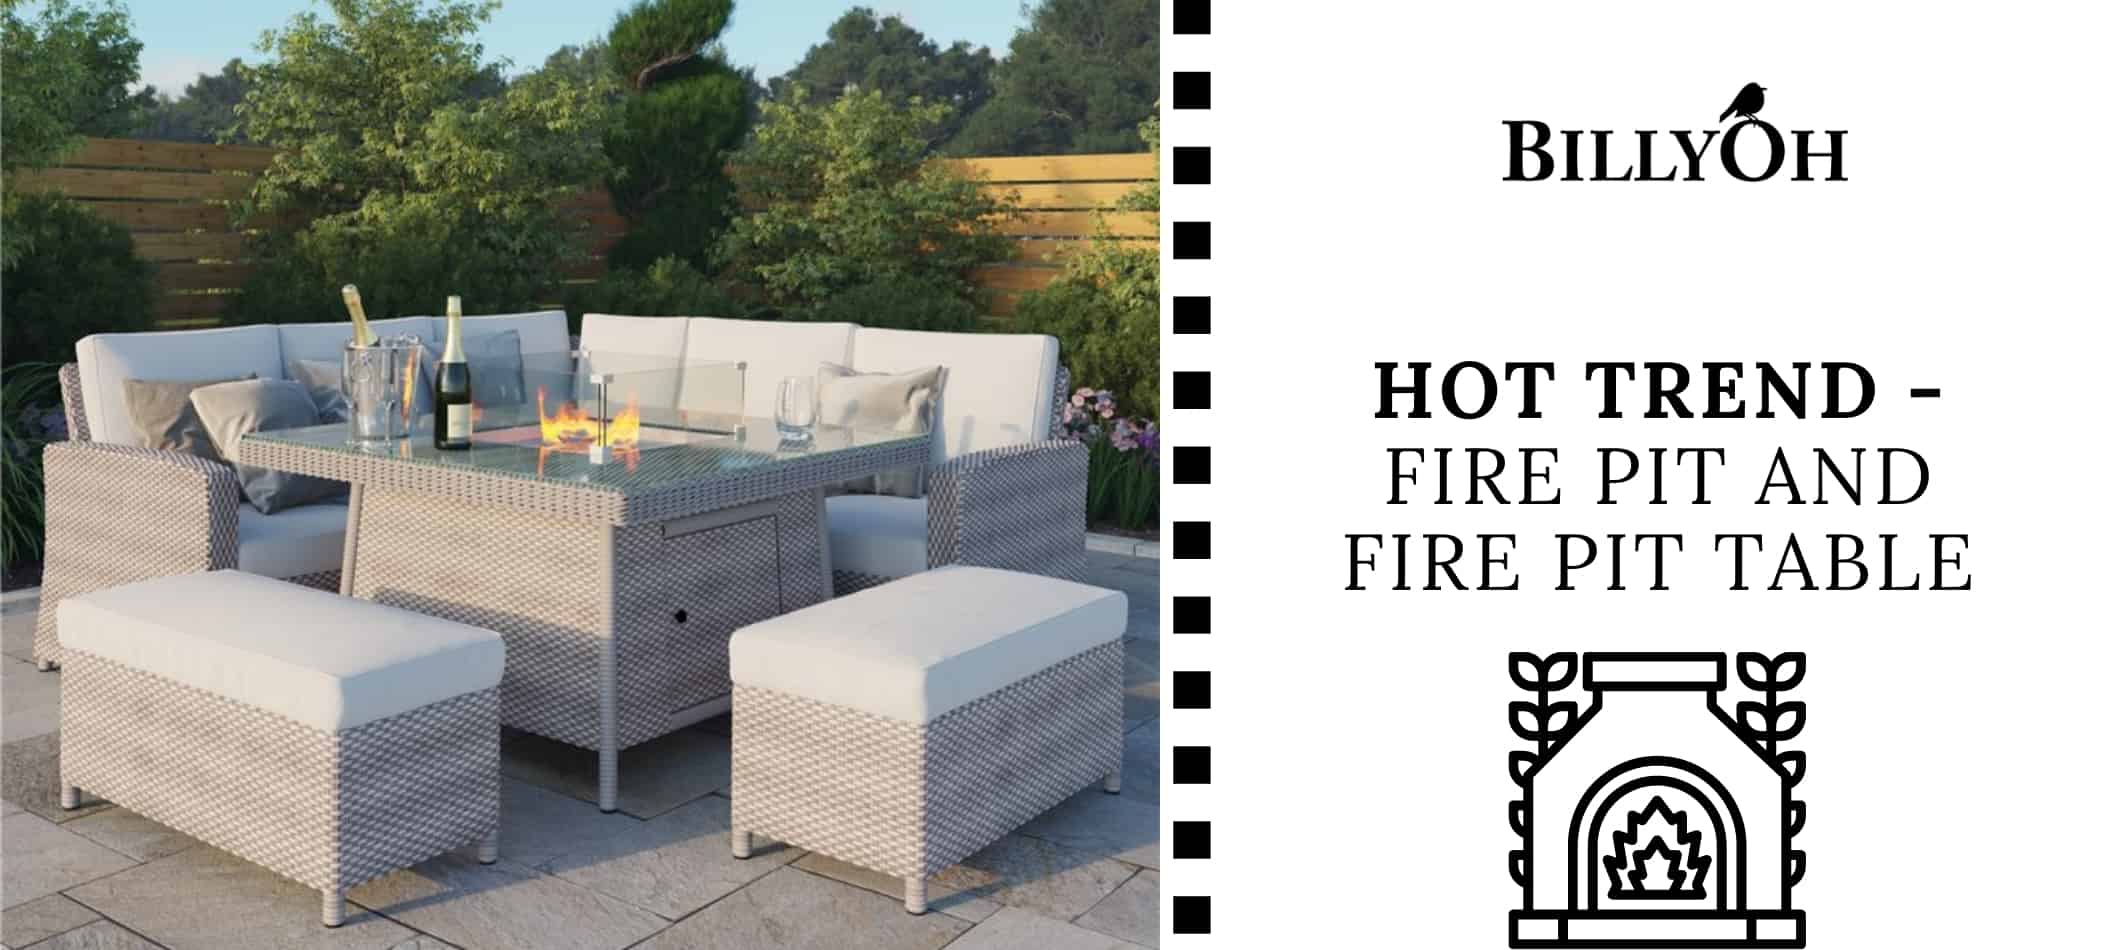 BillyOh corner fire pit table sofa set with BillyOh logo and white and black cartoon film reel banner